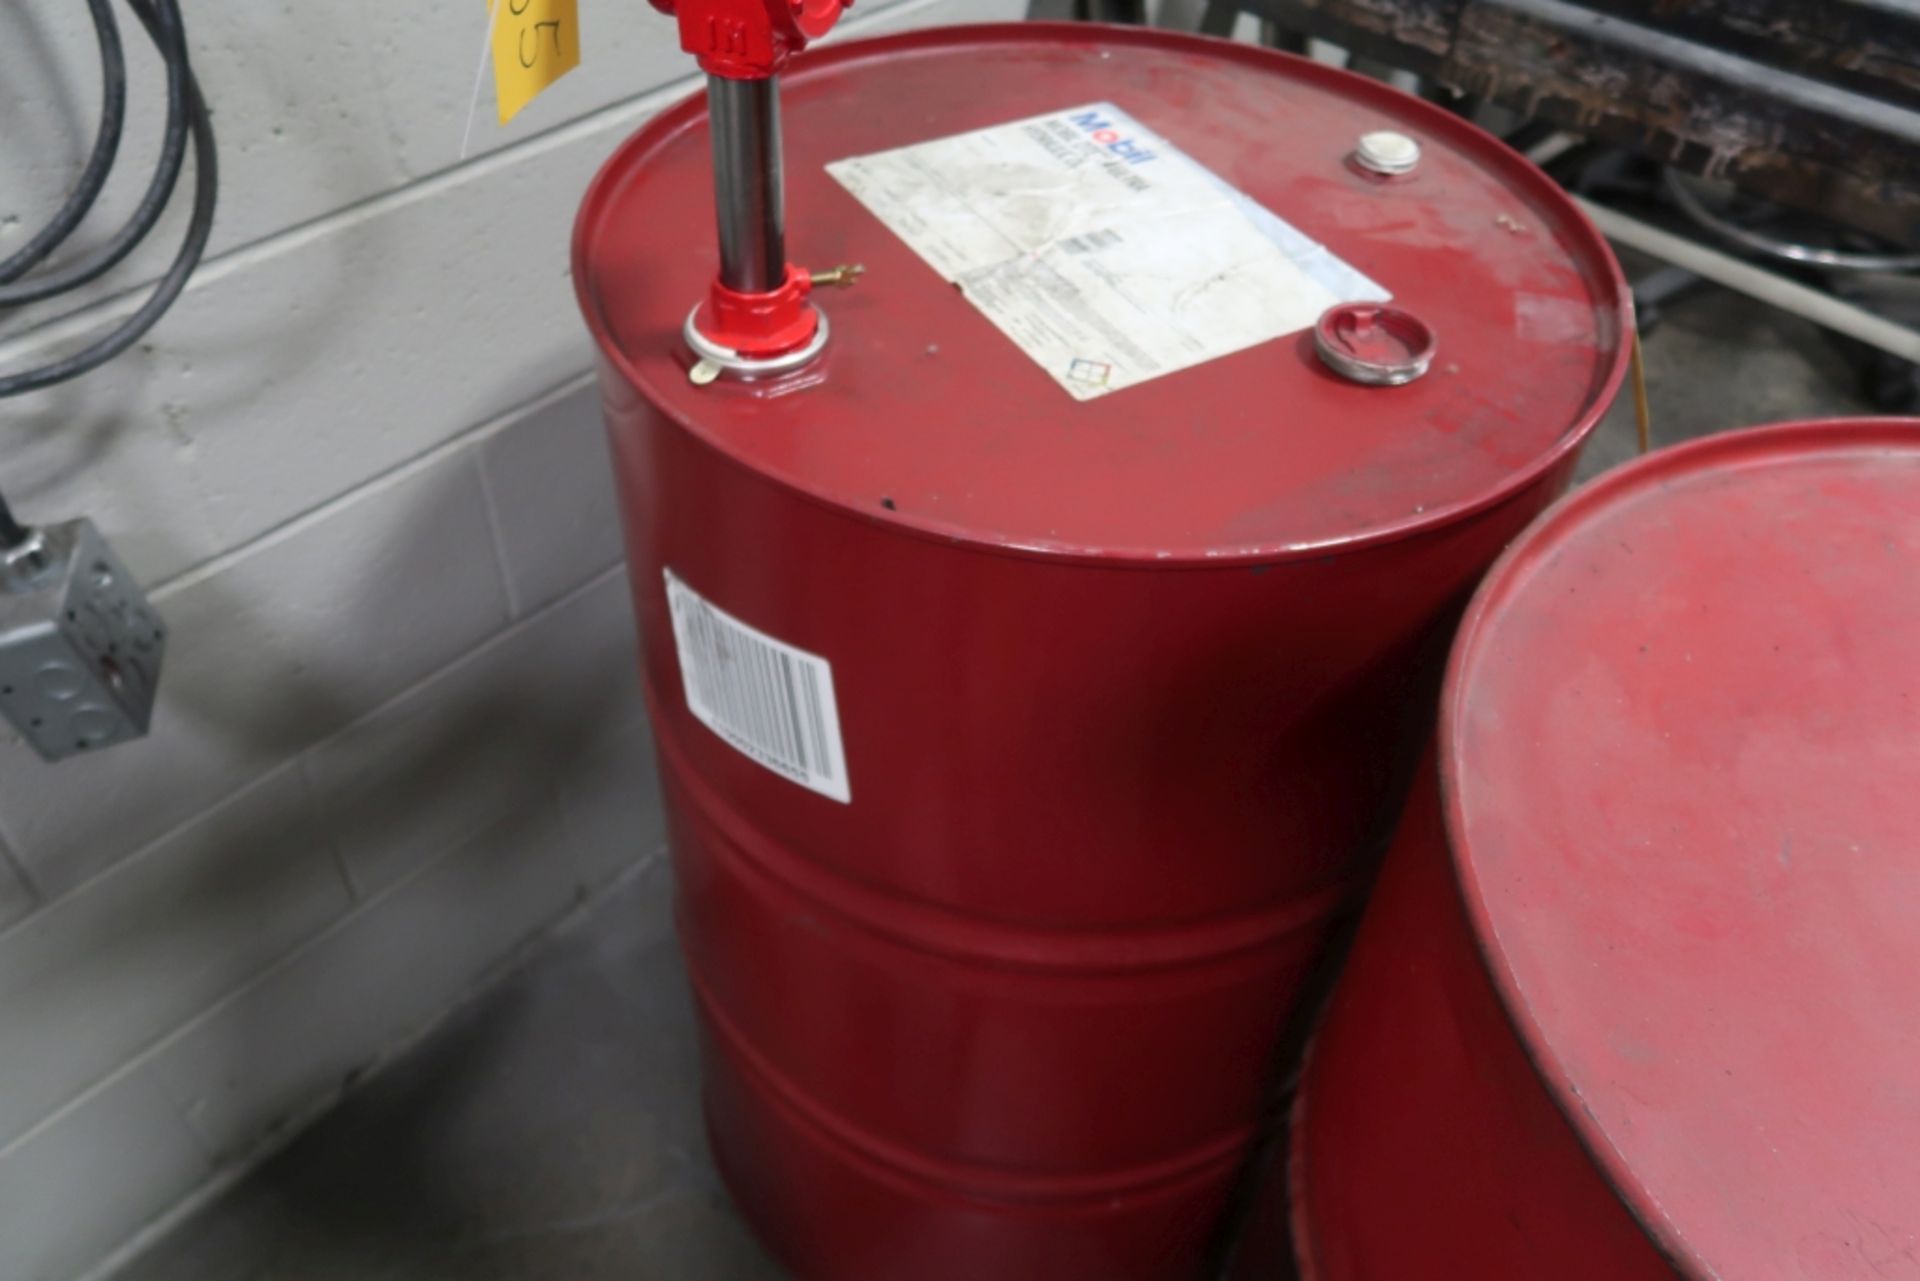 DRUM OF MOBILE DTE 24 ULTRA HYDRAULIC OIL, 70% FULL